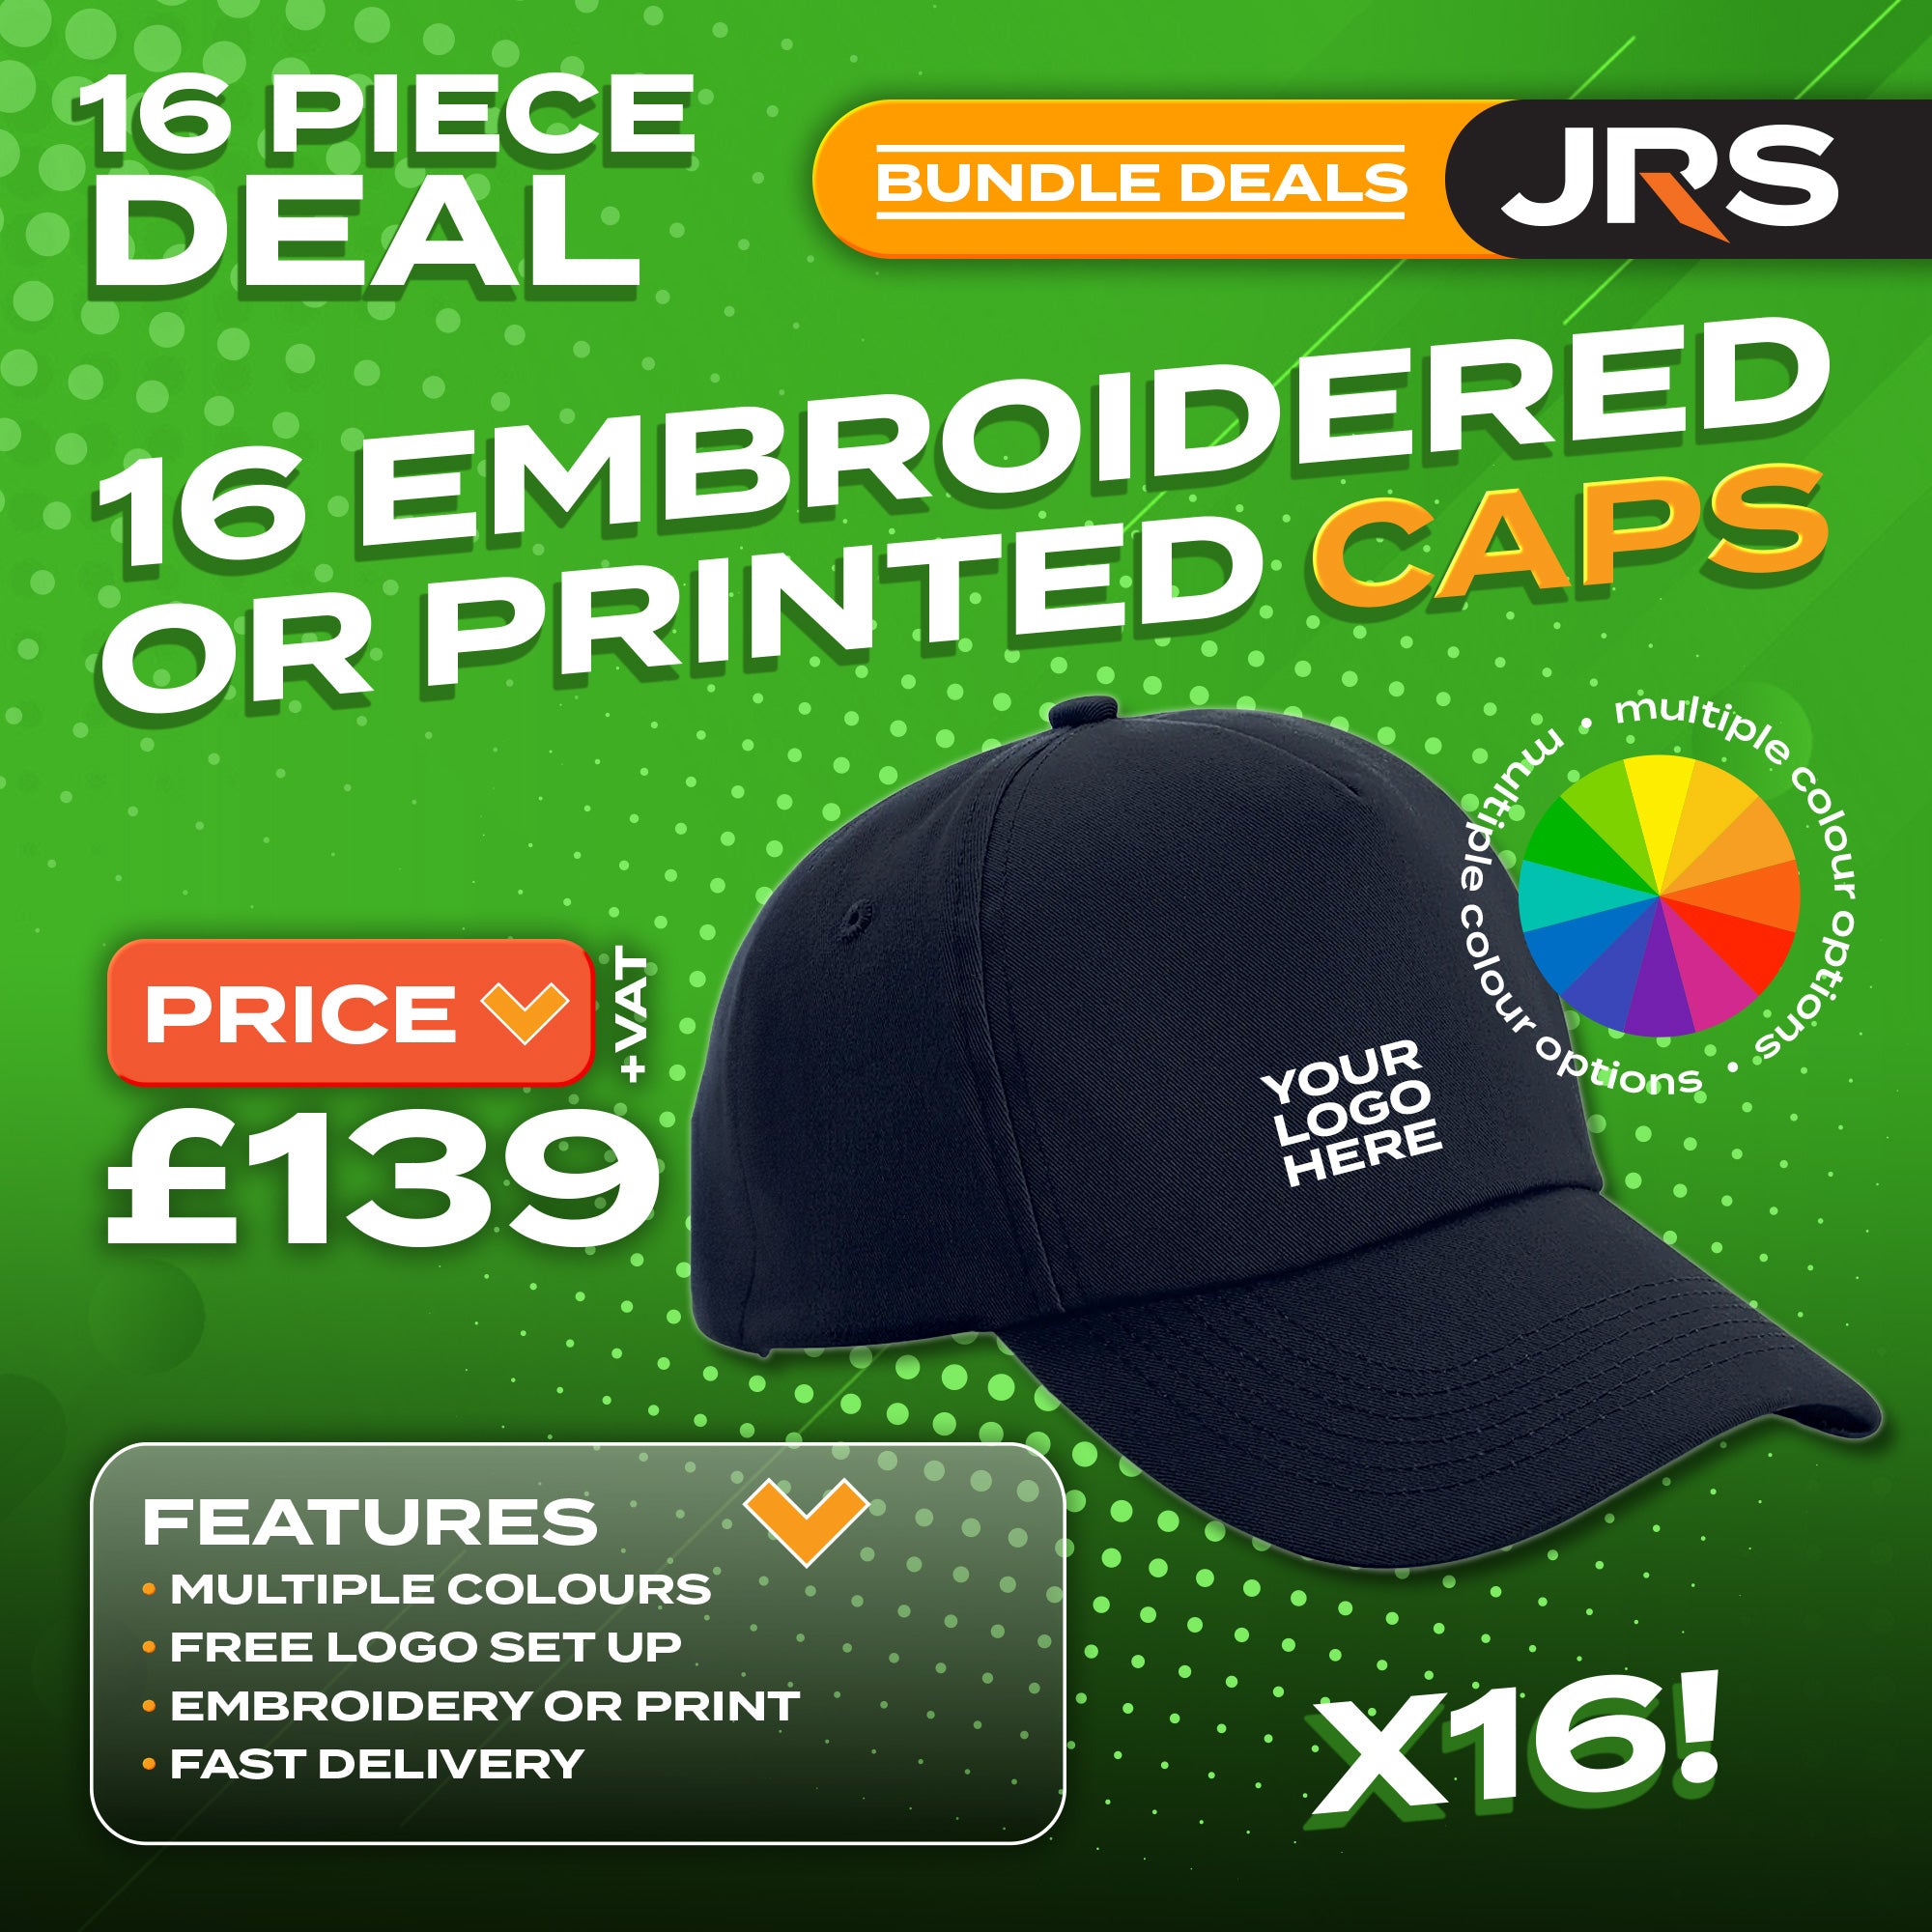 16x Embroidered/Printed Caps Bundle Deal with Free Company/Club Logo